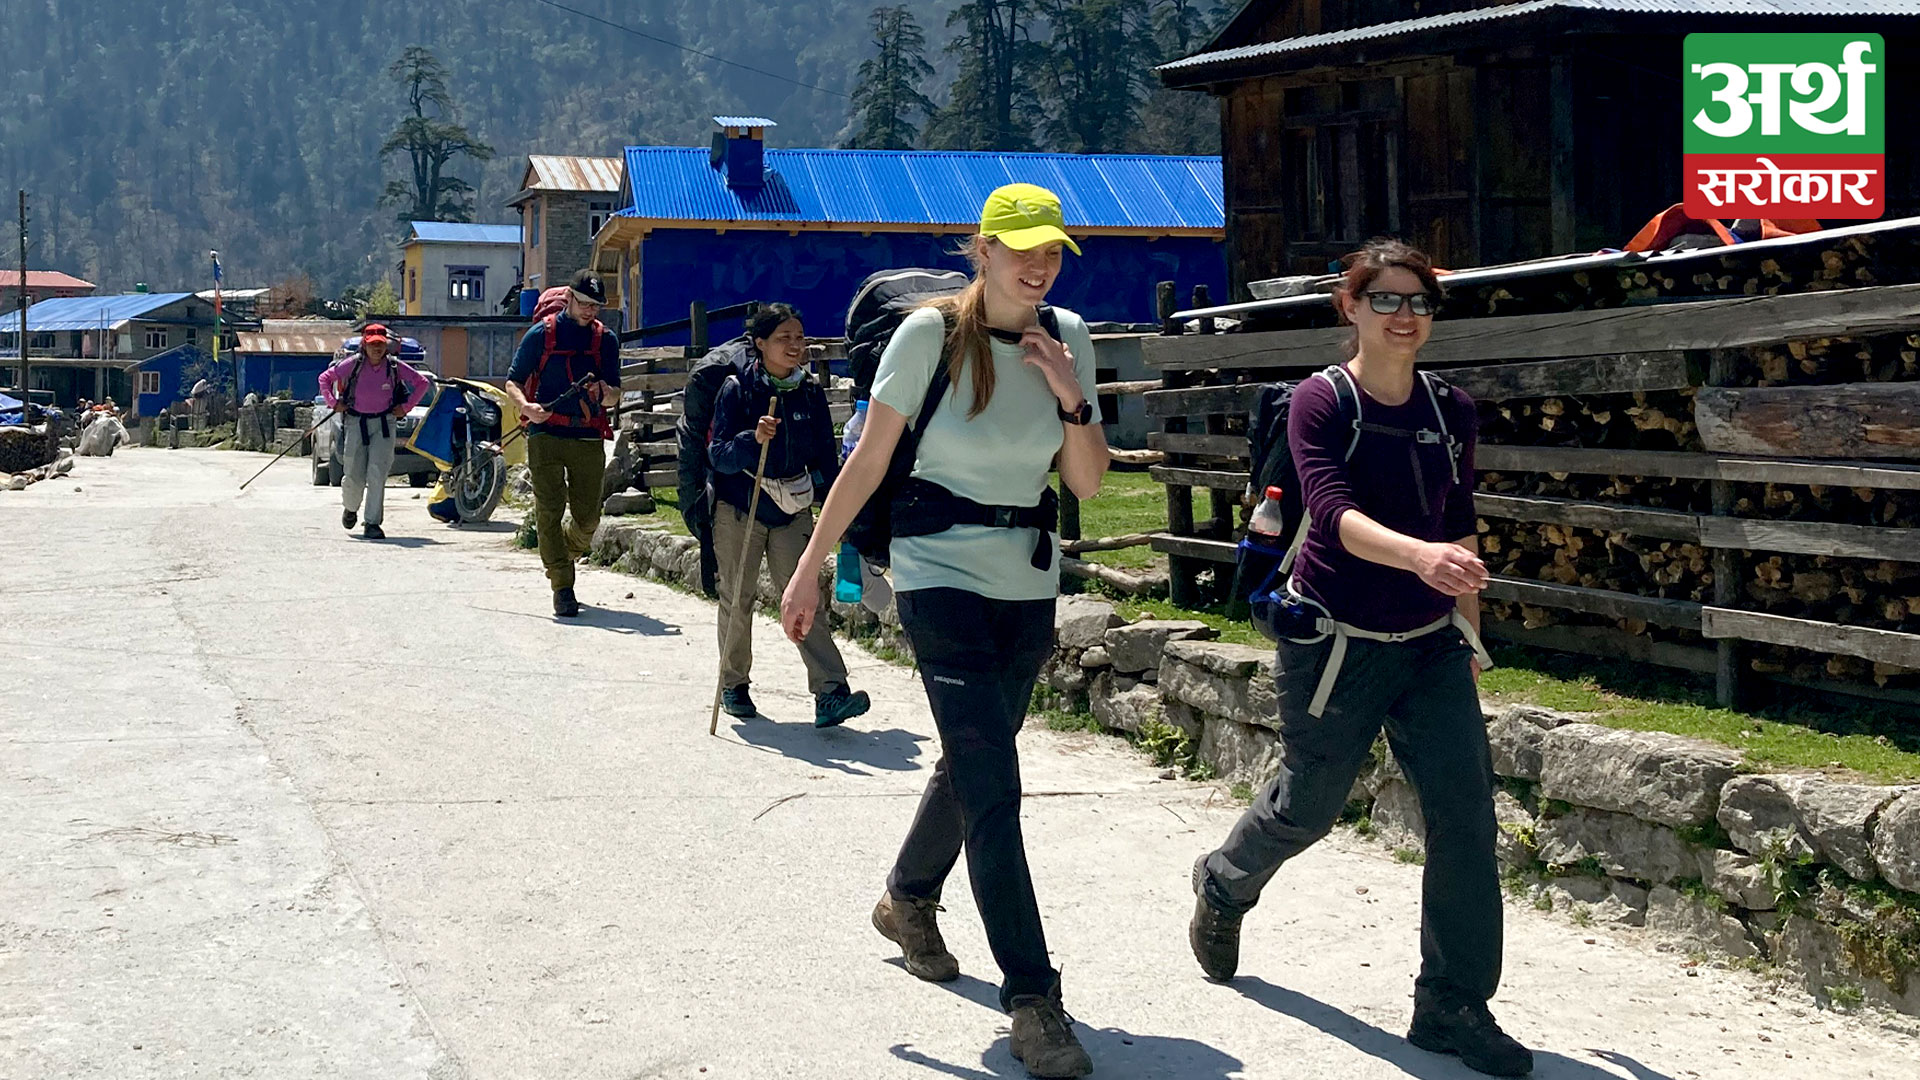 Over 177,000 tourists visit the Annapurna area in 10 months